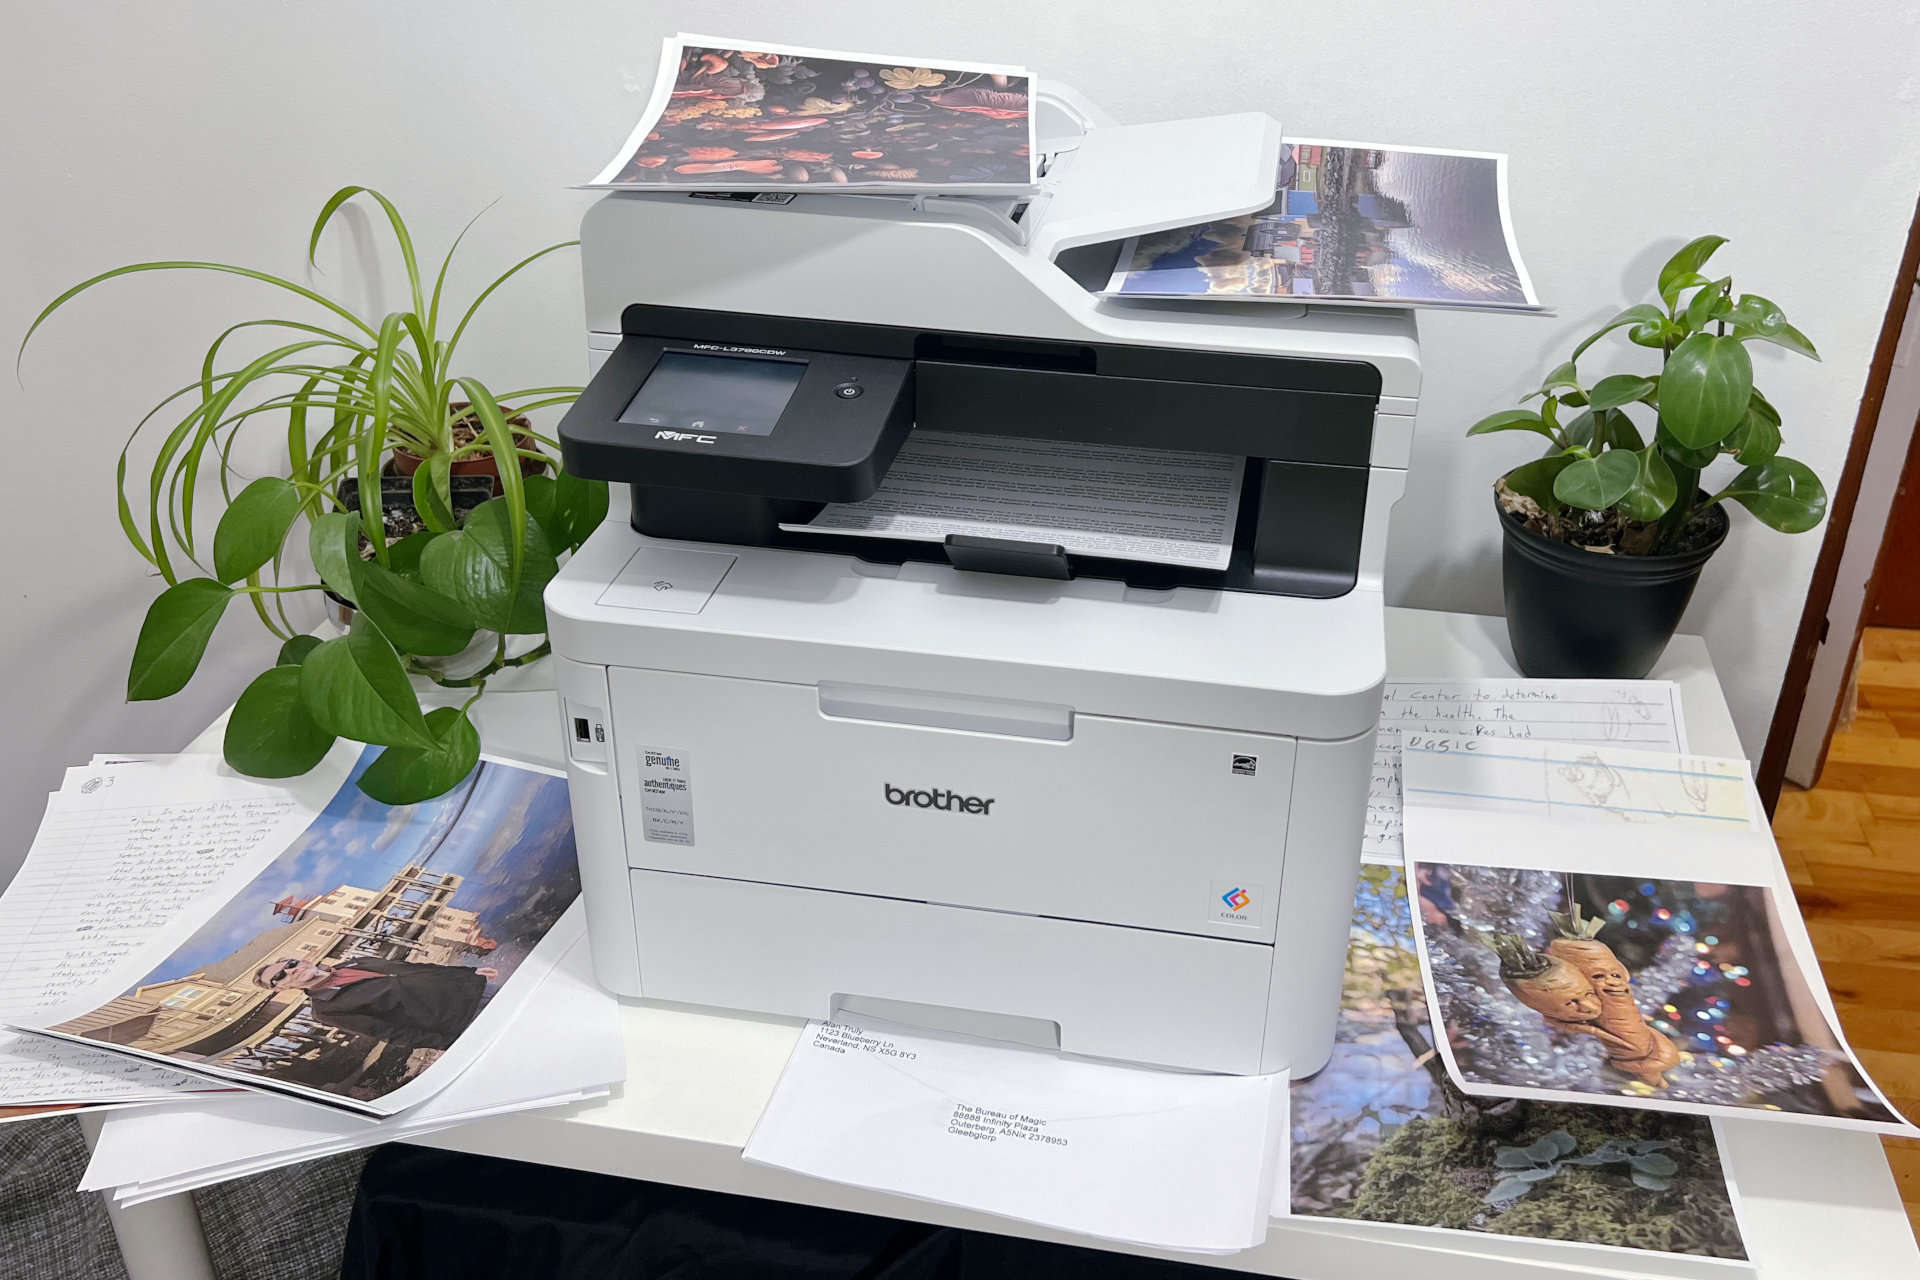 Quality is good for black-and-white and color documents, but photos are not the Brother MFC-L3780 CDW's strength.